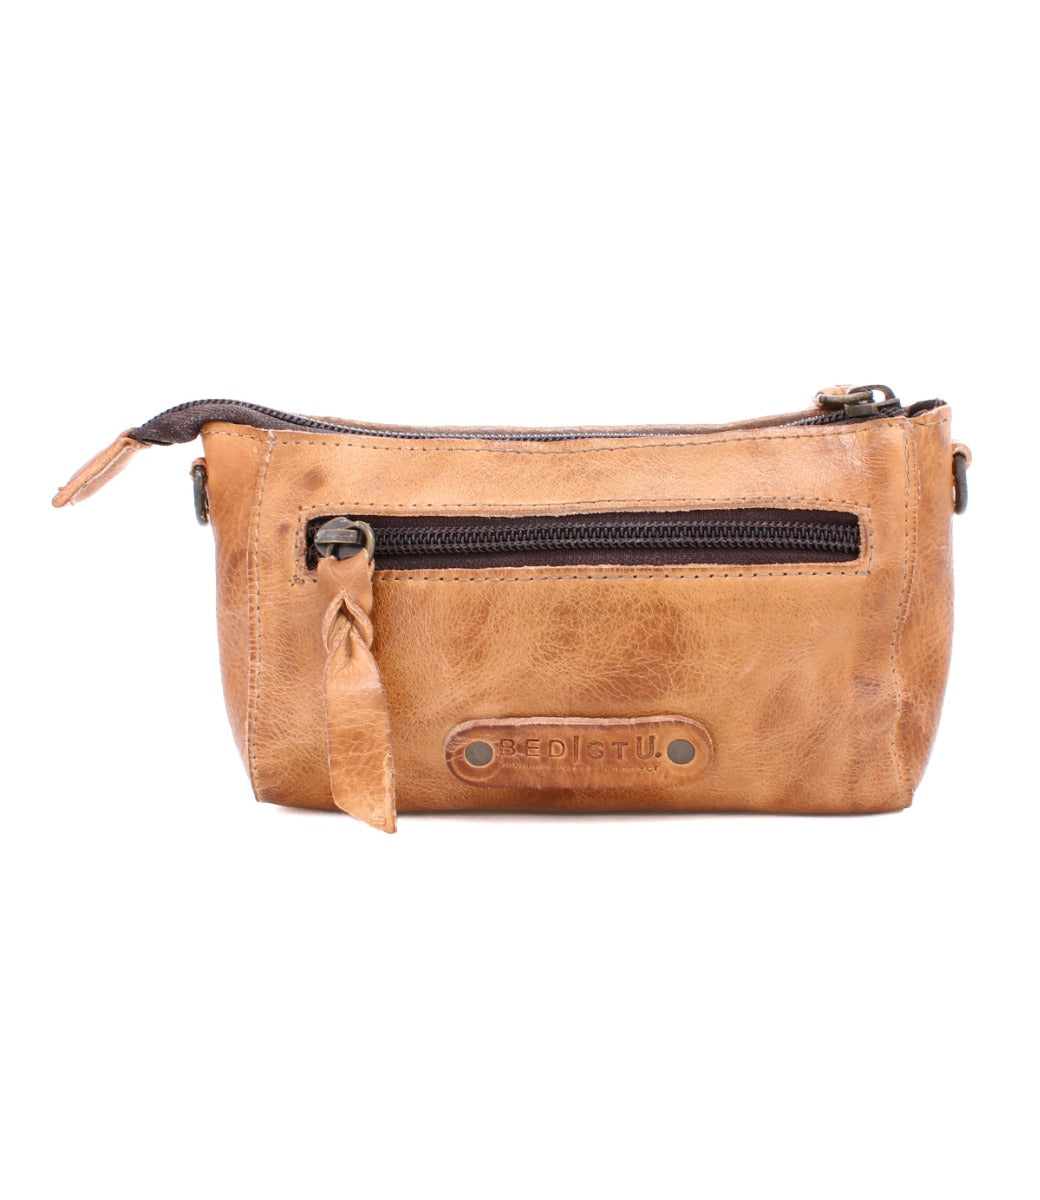 A tan leather pouch with a zipper by Bed Stu.